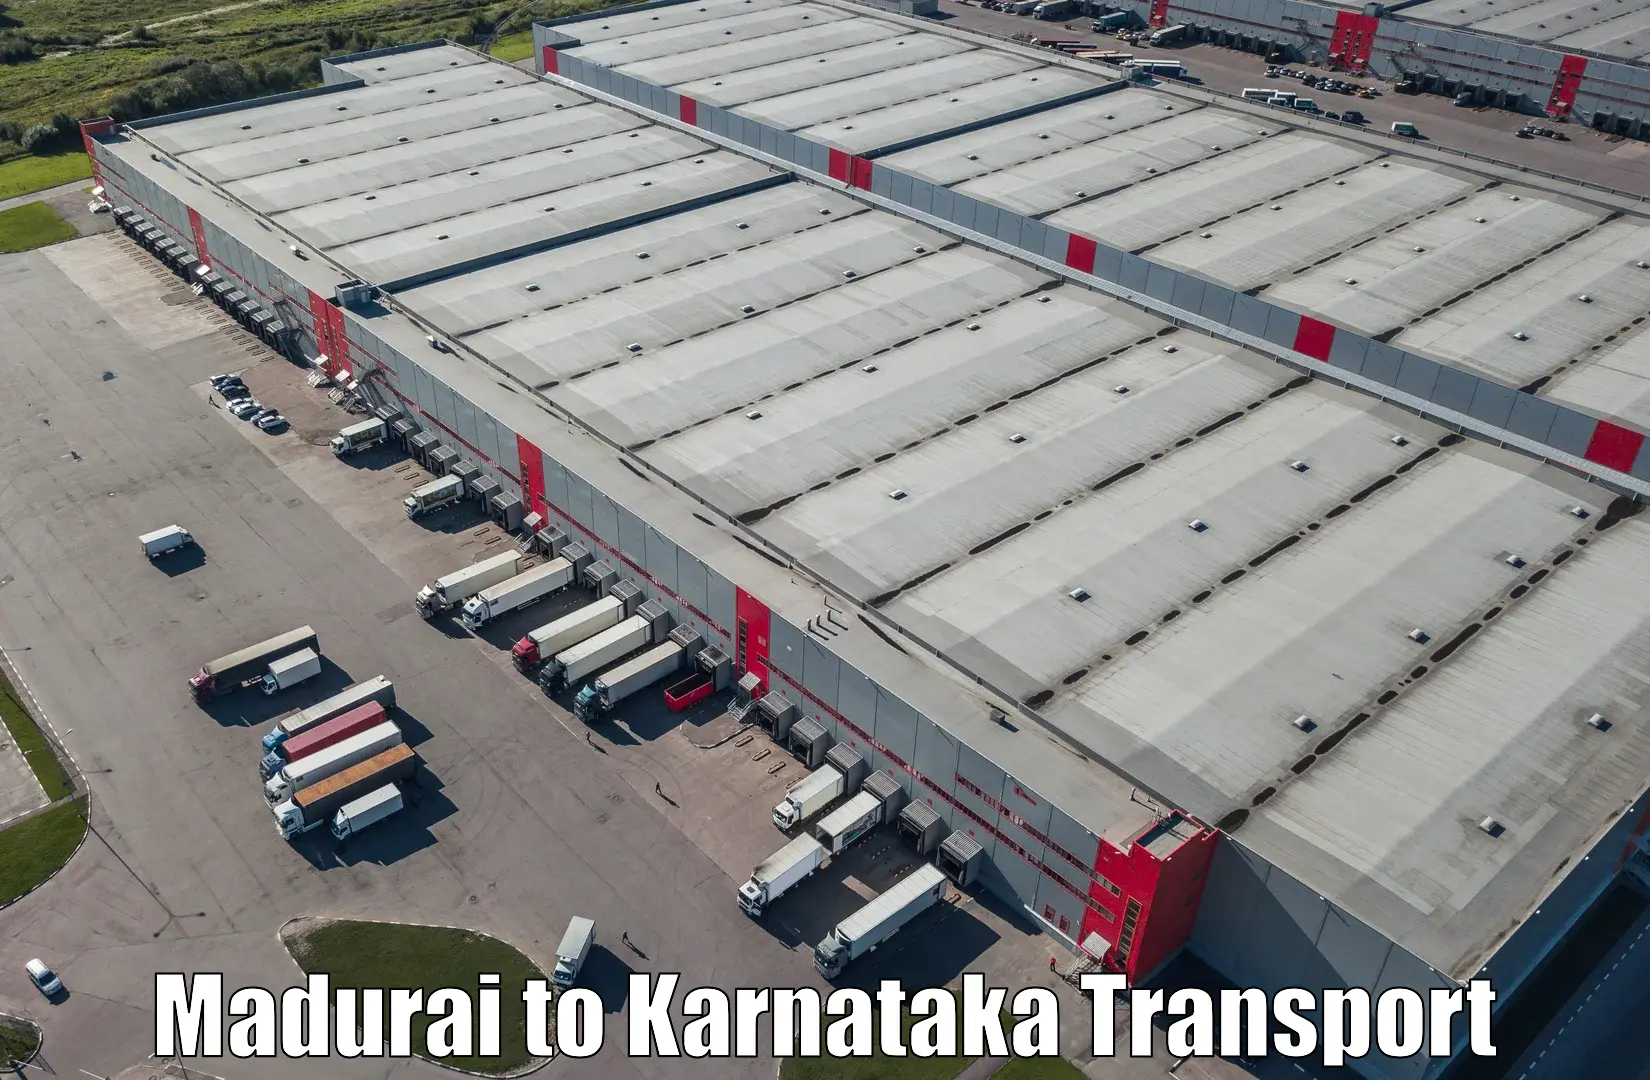 Express transport services in Madurai to Bangalore